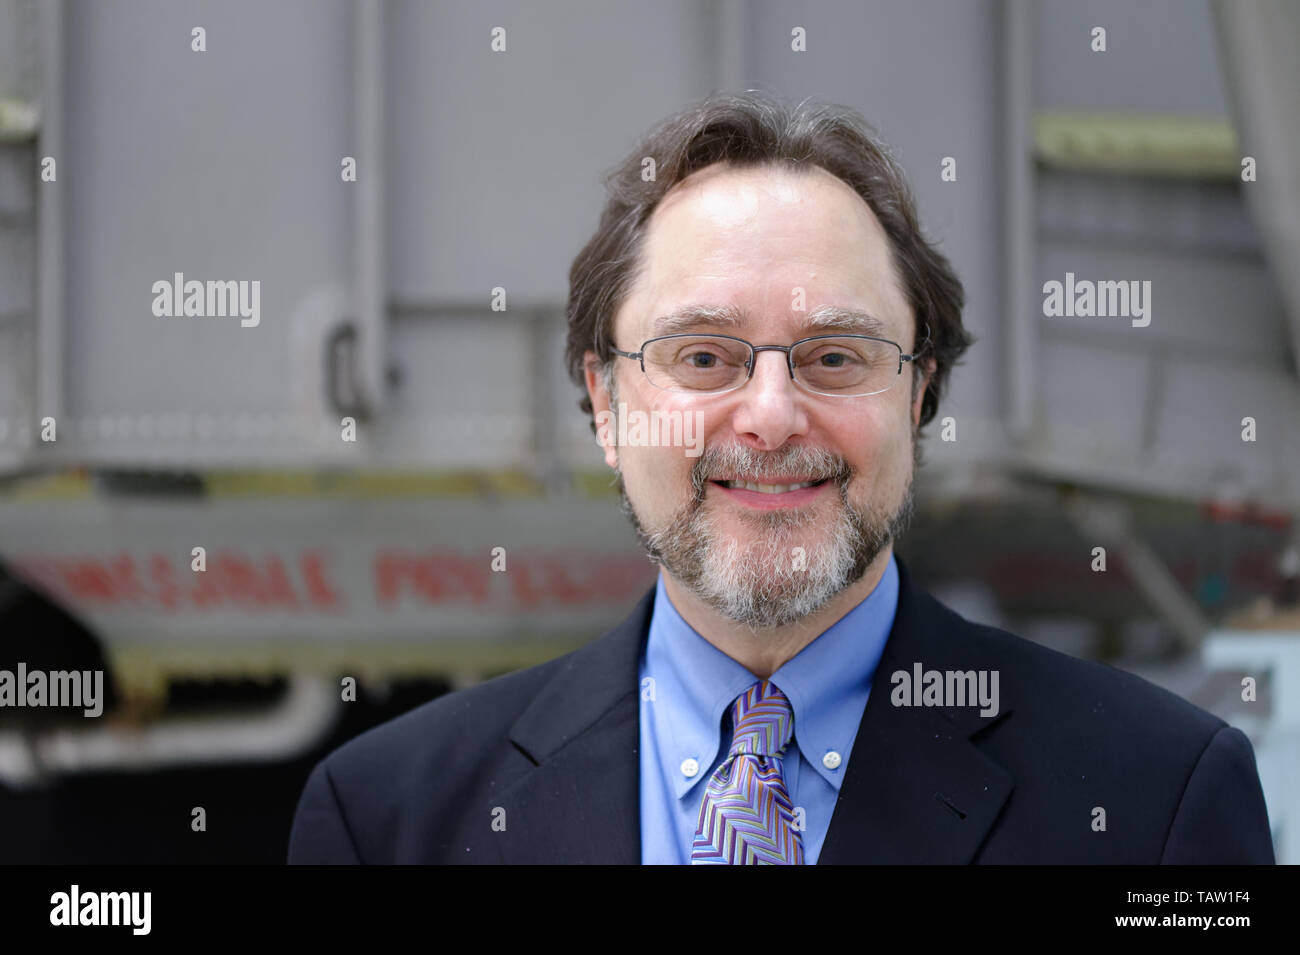 Garden City, New York, USA. 23rd May, 2019. ANDREW CHAIKIN, best-selling author of A Man on the Moon: The Voyages of the Apollo Astronauts, poses for photo at one of the Cradle of Aviation Museum events in celebration of 50th Anniversary of Apollo 11. Chaikin reminisced about growing up on Long Island during the Apollo space program and interviewing Apollo astronauts. The HBO miniseries From the Earth to the Moon was mainly based on Chaikin's book. Credit: Ann Parry/ZUMA Wire/Alamy Live News Stock Photo